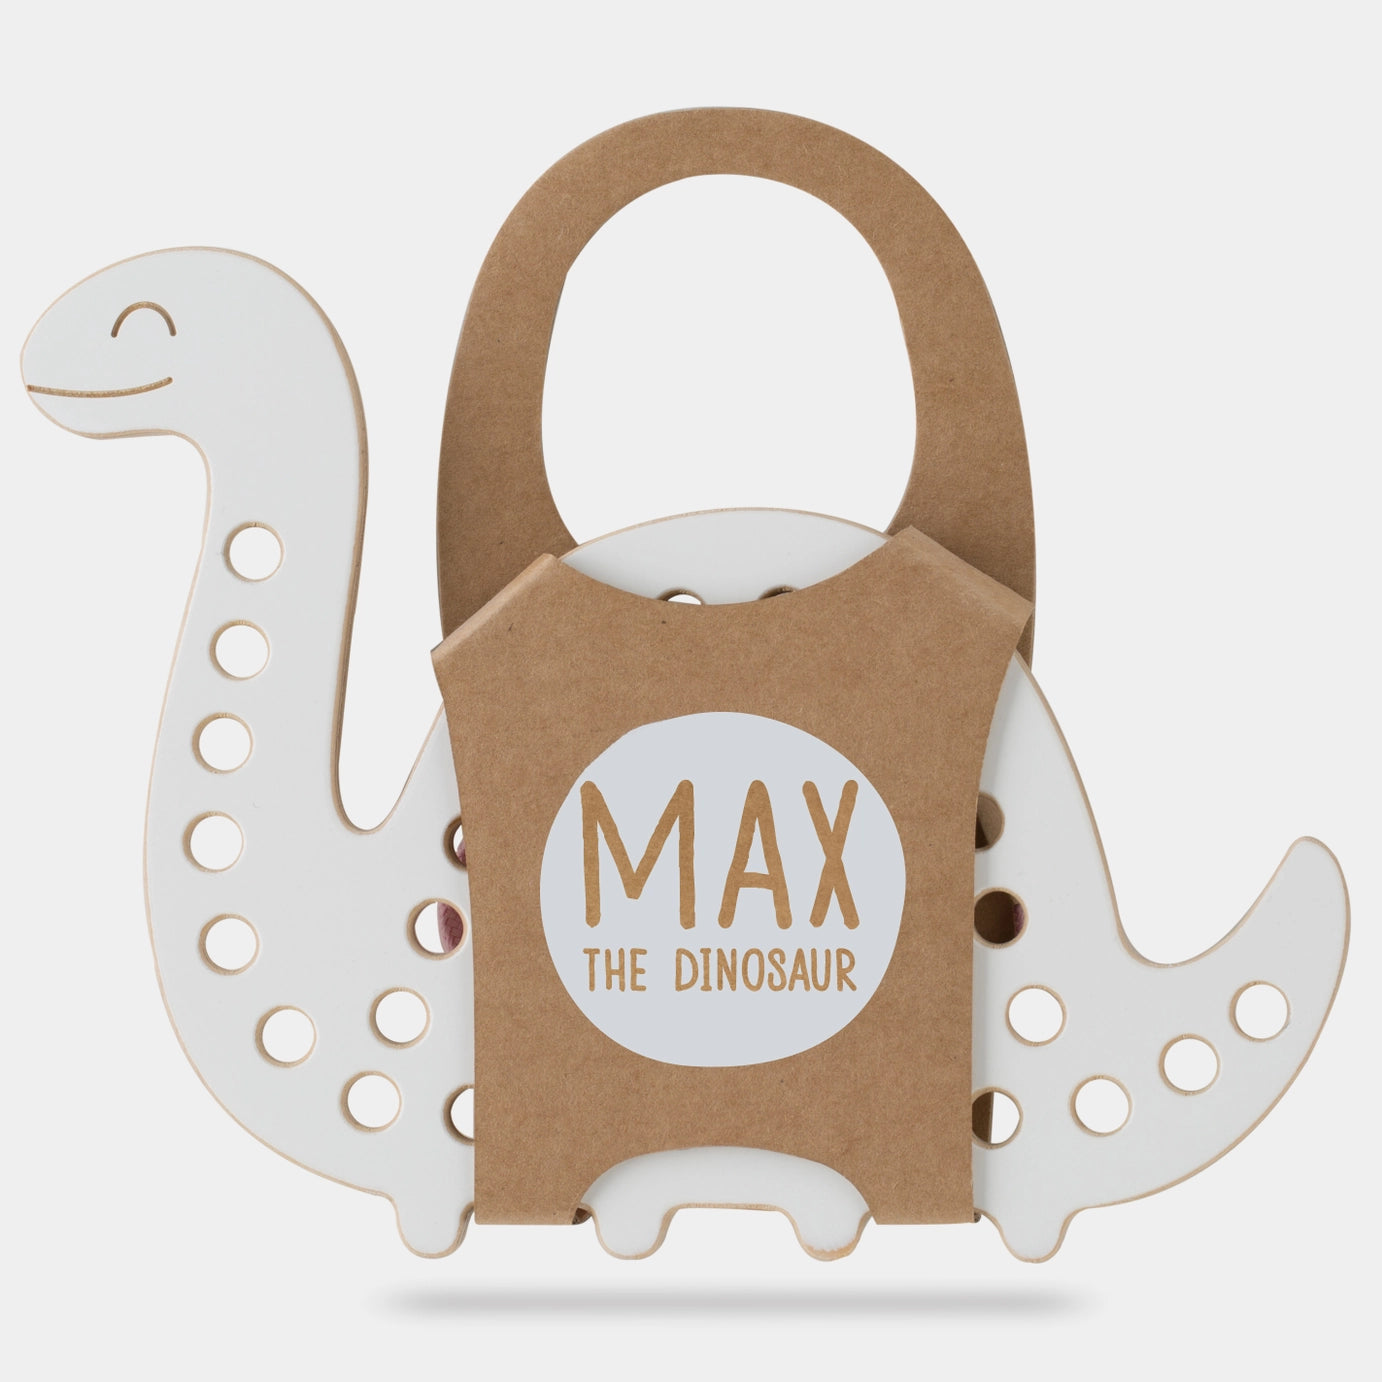 Max the Dinosaur, Wooden Lacing Toy